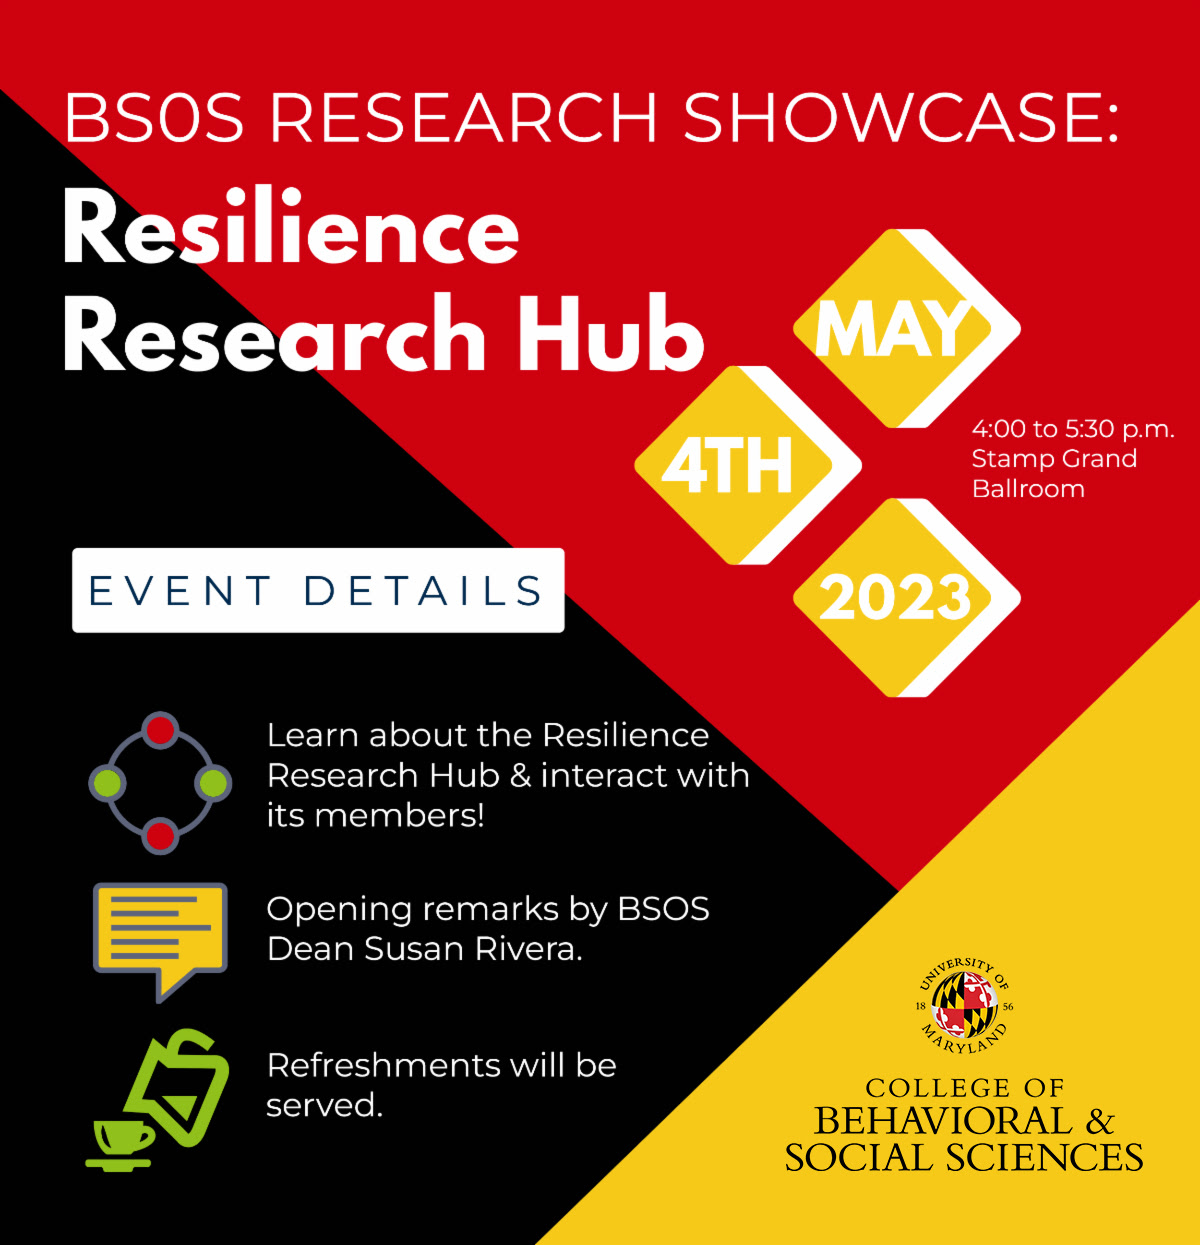 BSOS Research Showcase: Resilience Research Hub event poster